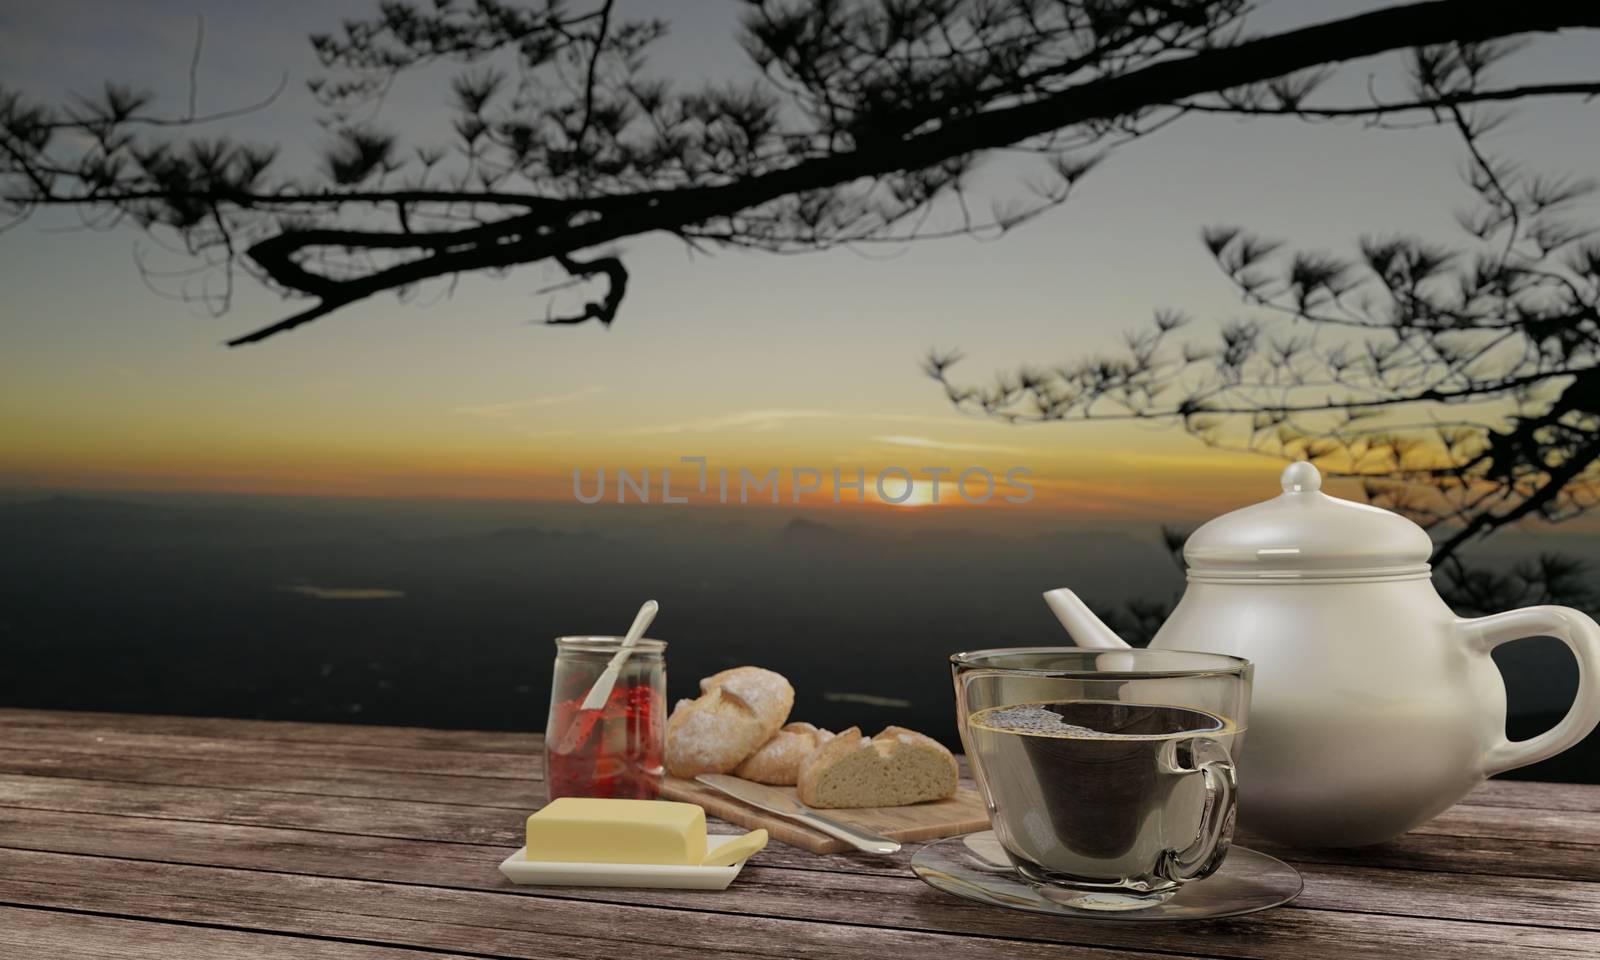 Home made bread and  butcher in breakfast  concept on wooden table. Blur black coffee in clear cup.   Background mountian view and sunrise. 3D rendering.